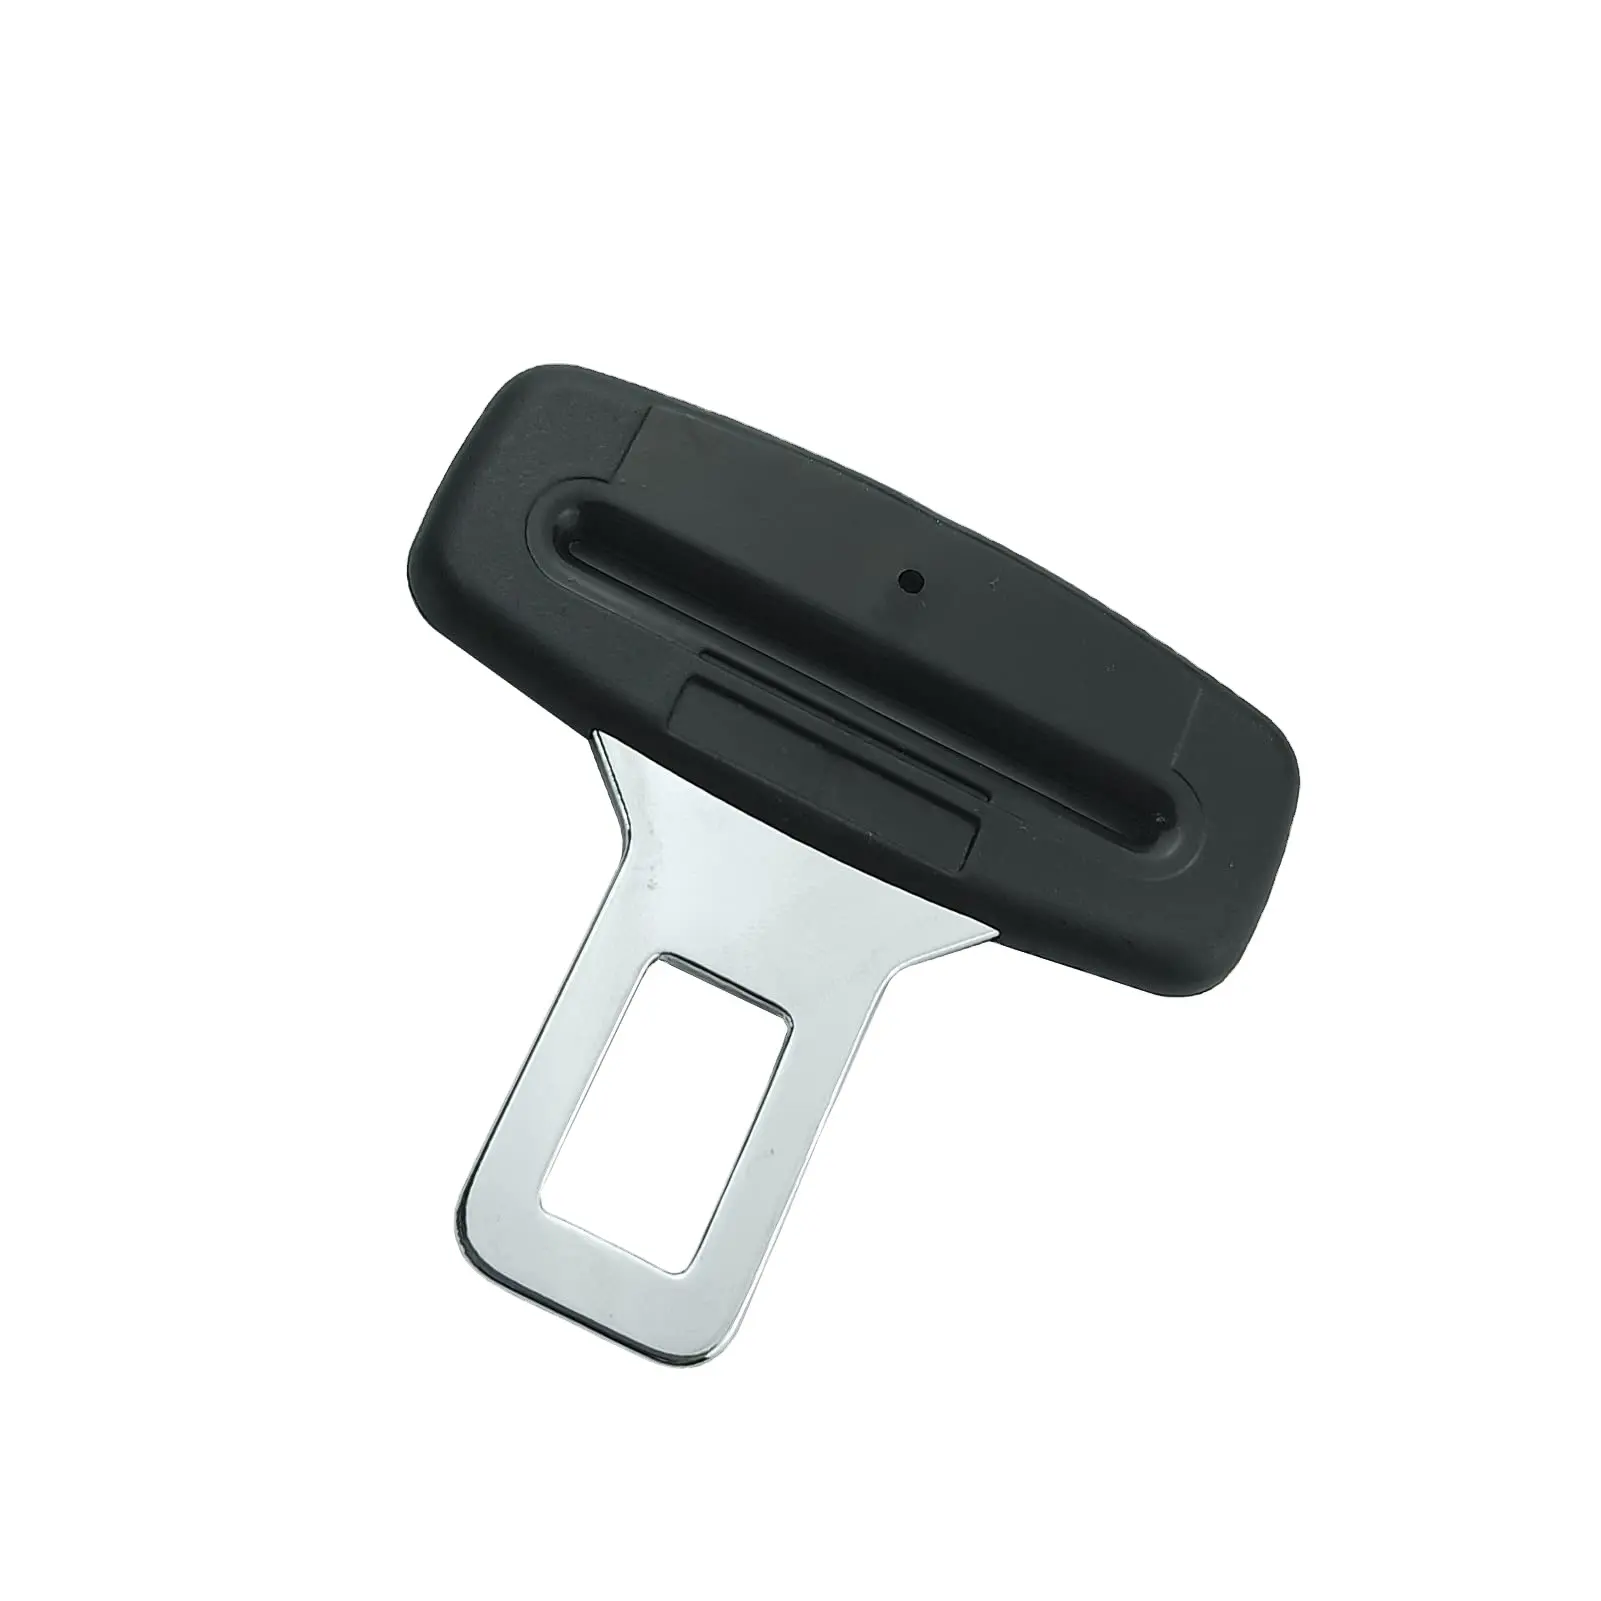 Vehicle Seat Accessory Clip Seat Belt Accessory Commonly Used In Most Cars